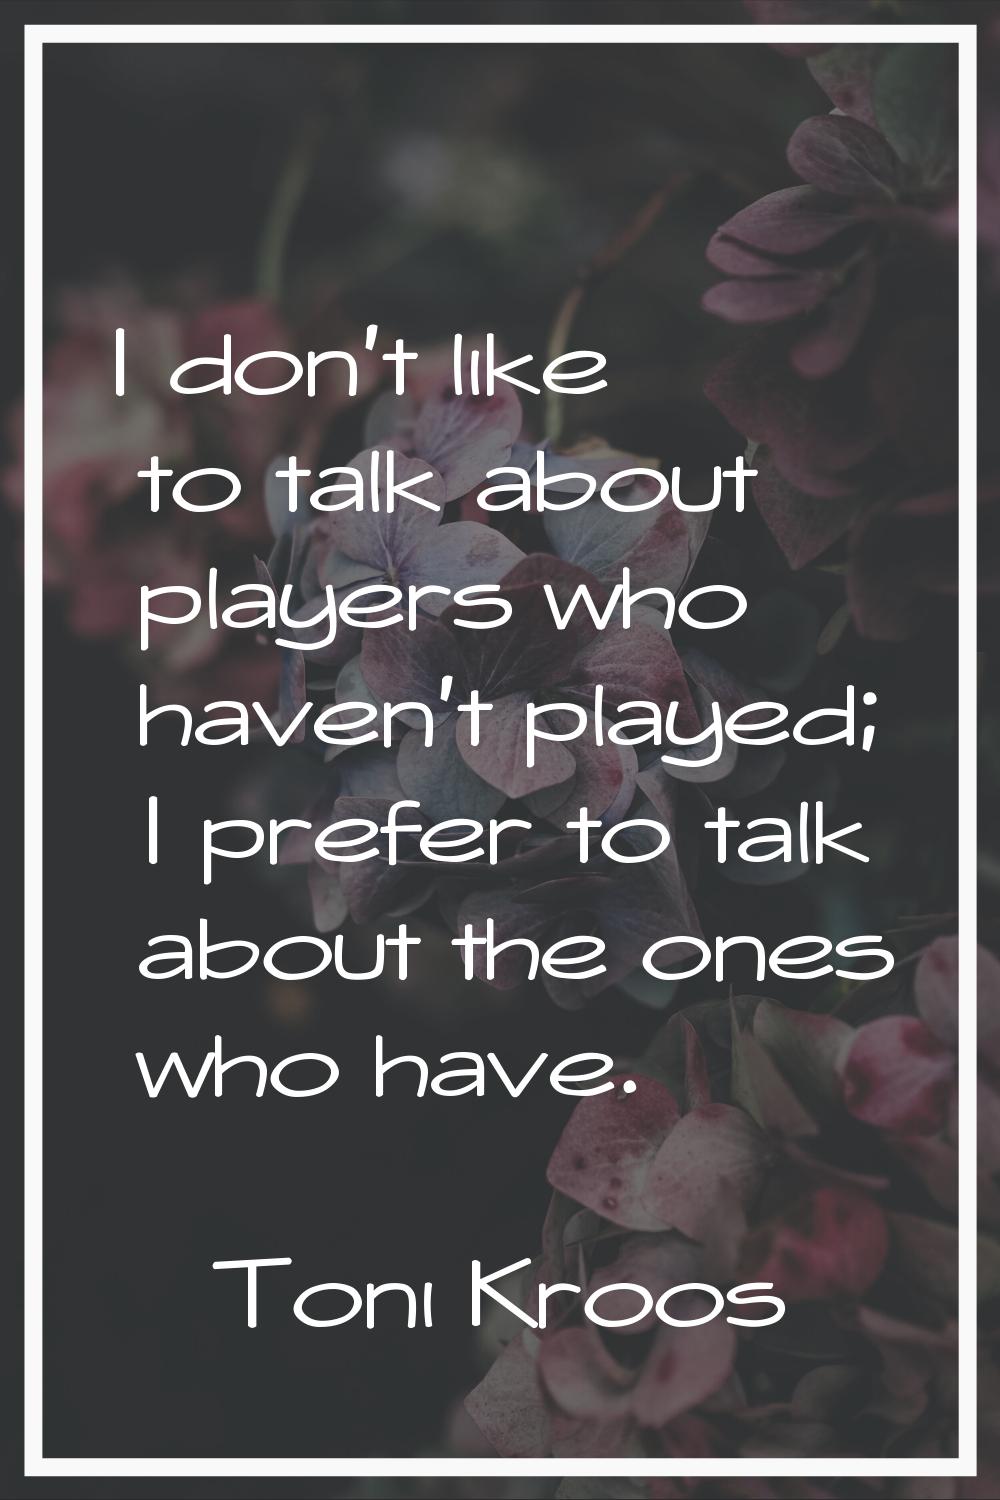 I don't like to talk about players who haven't played; I prefer to talk about the ones who have.